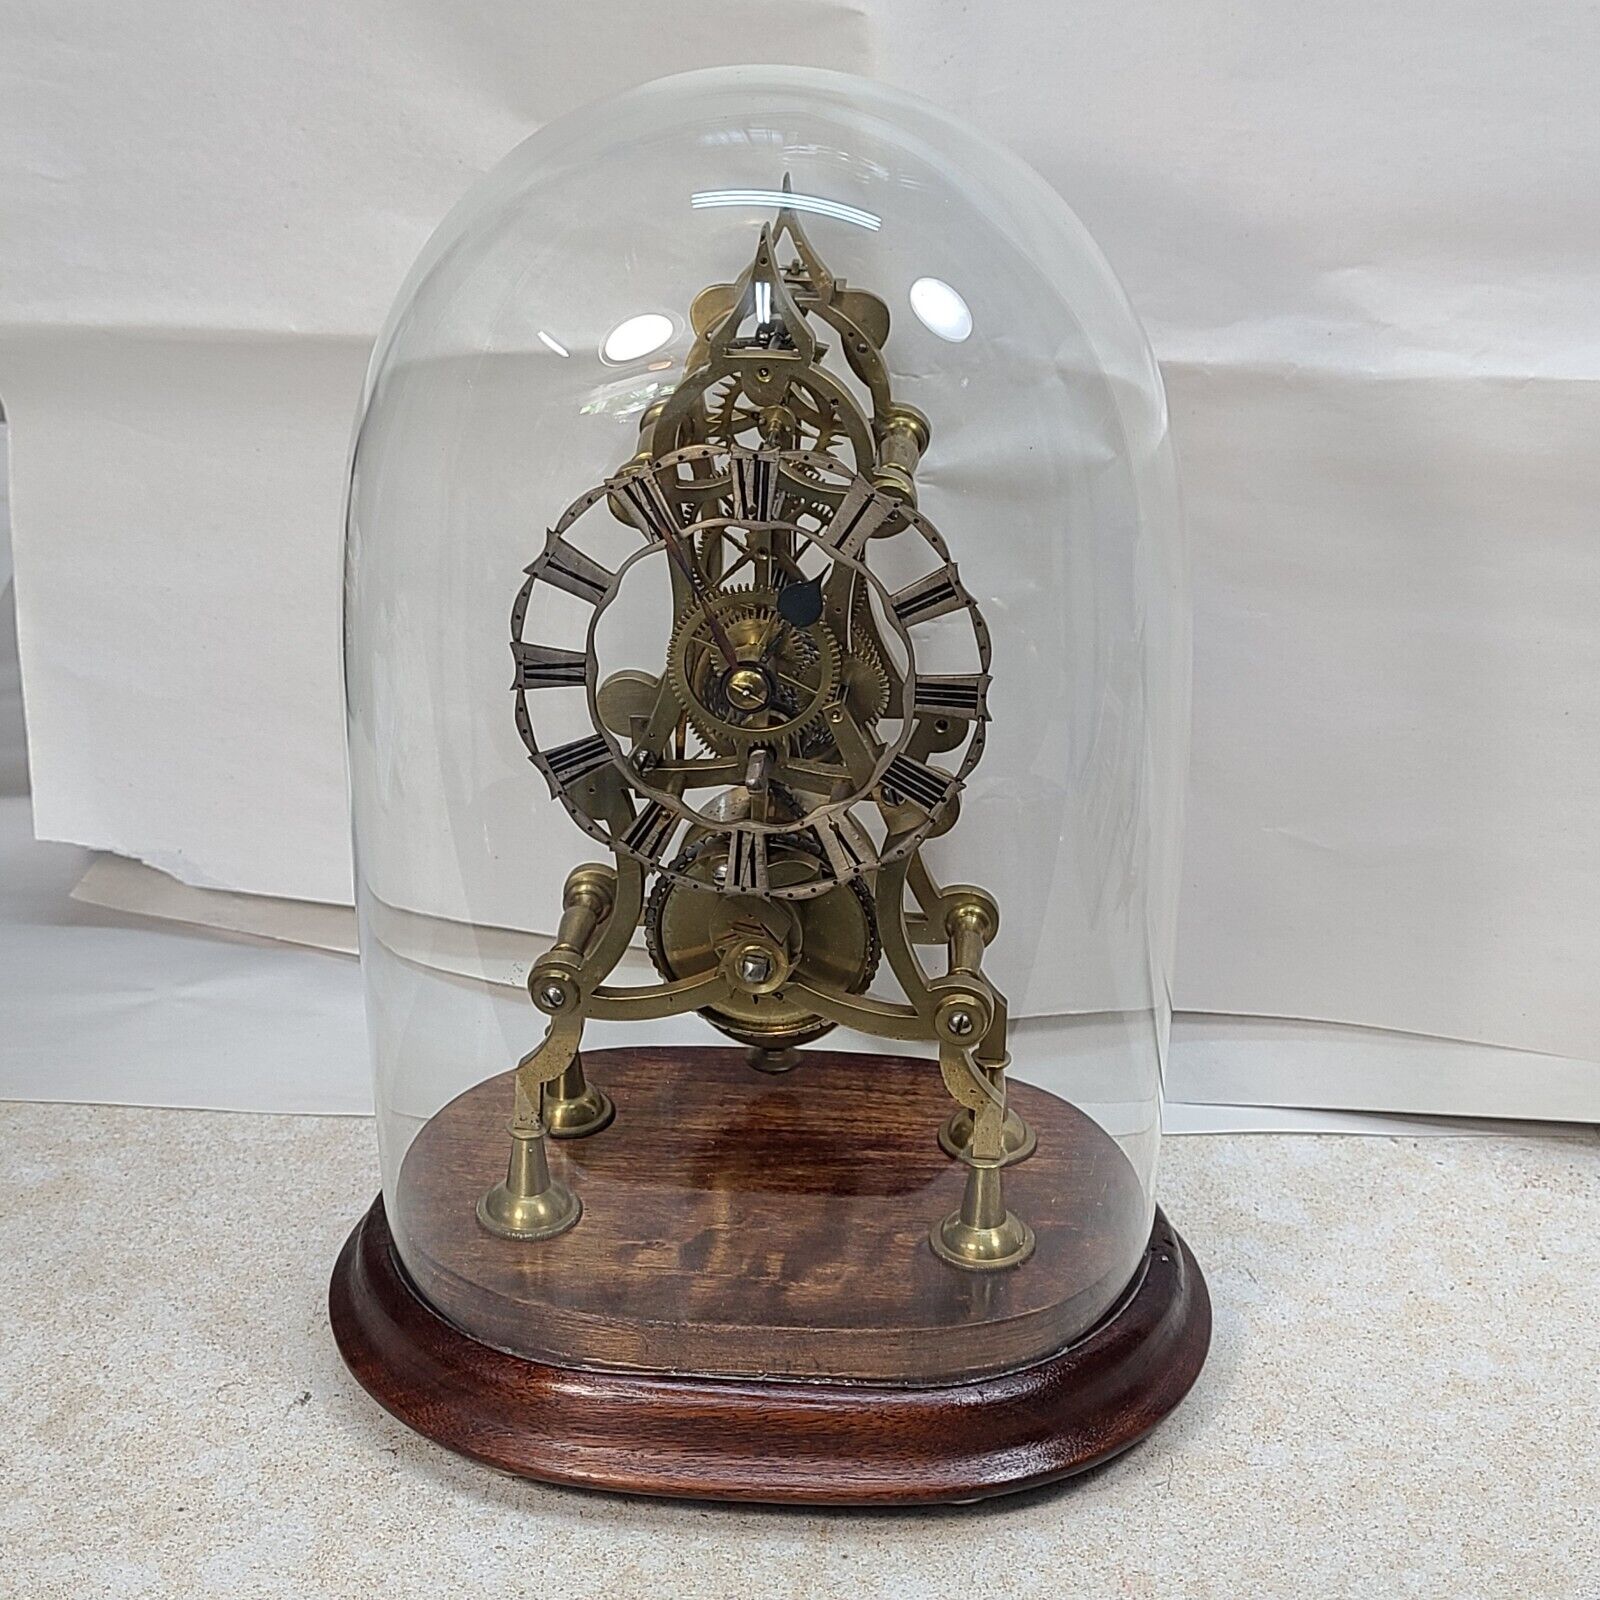 Antique English Single Fusee 8 Day Skeleton Clock In Working Condition.